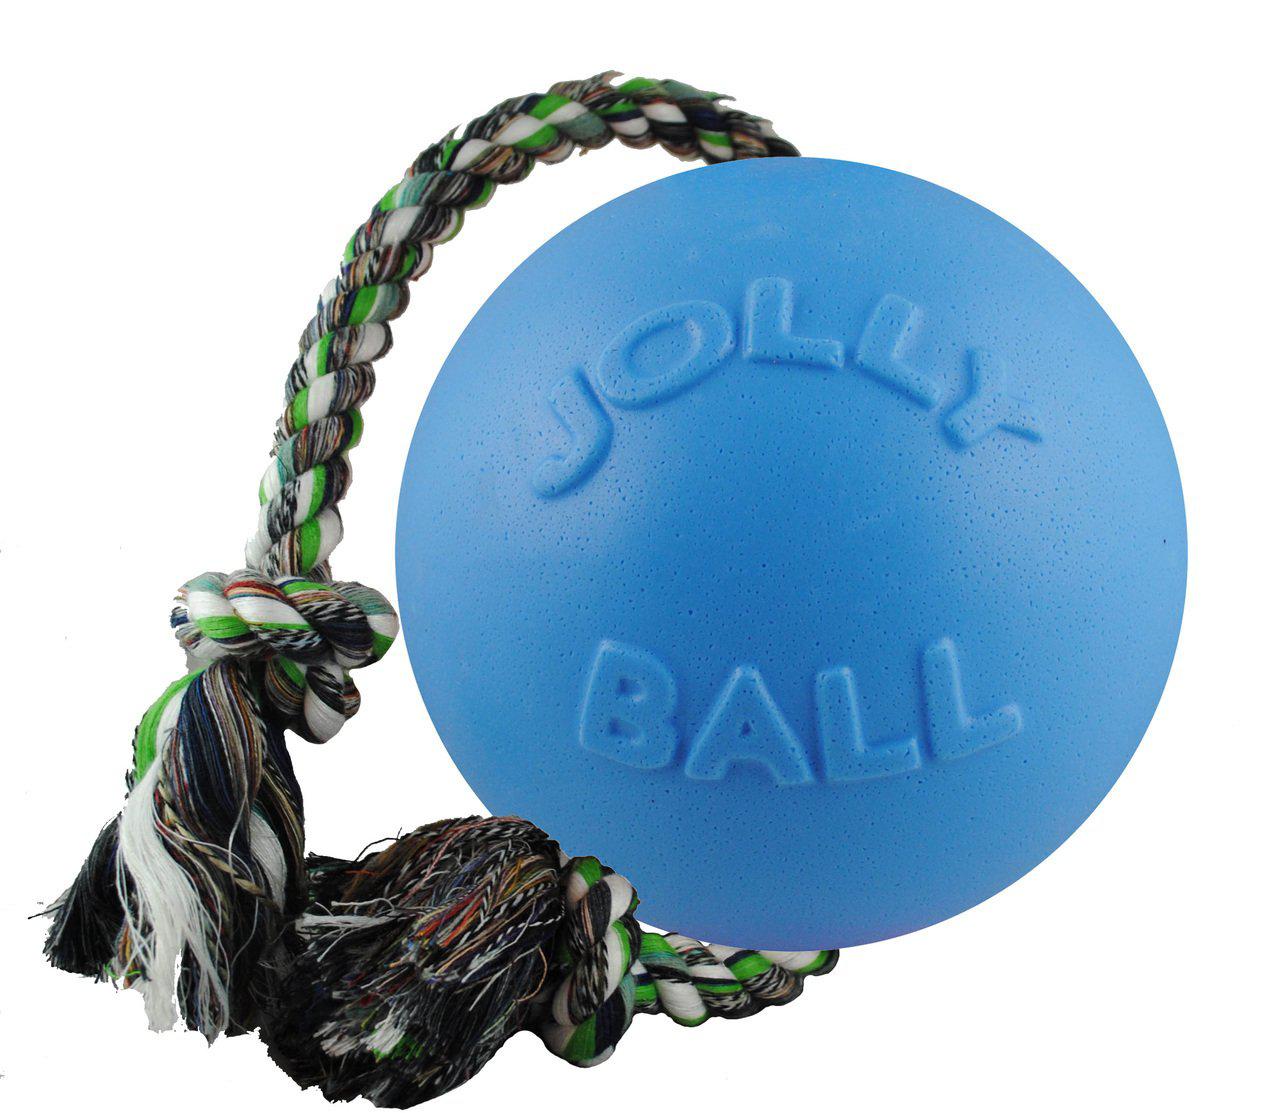 Jolly Pets Romp-N-Roll Tug Rope Ball Dog Toy, size/color varies-Le Pup Pet Supplies and Grooming